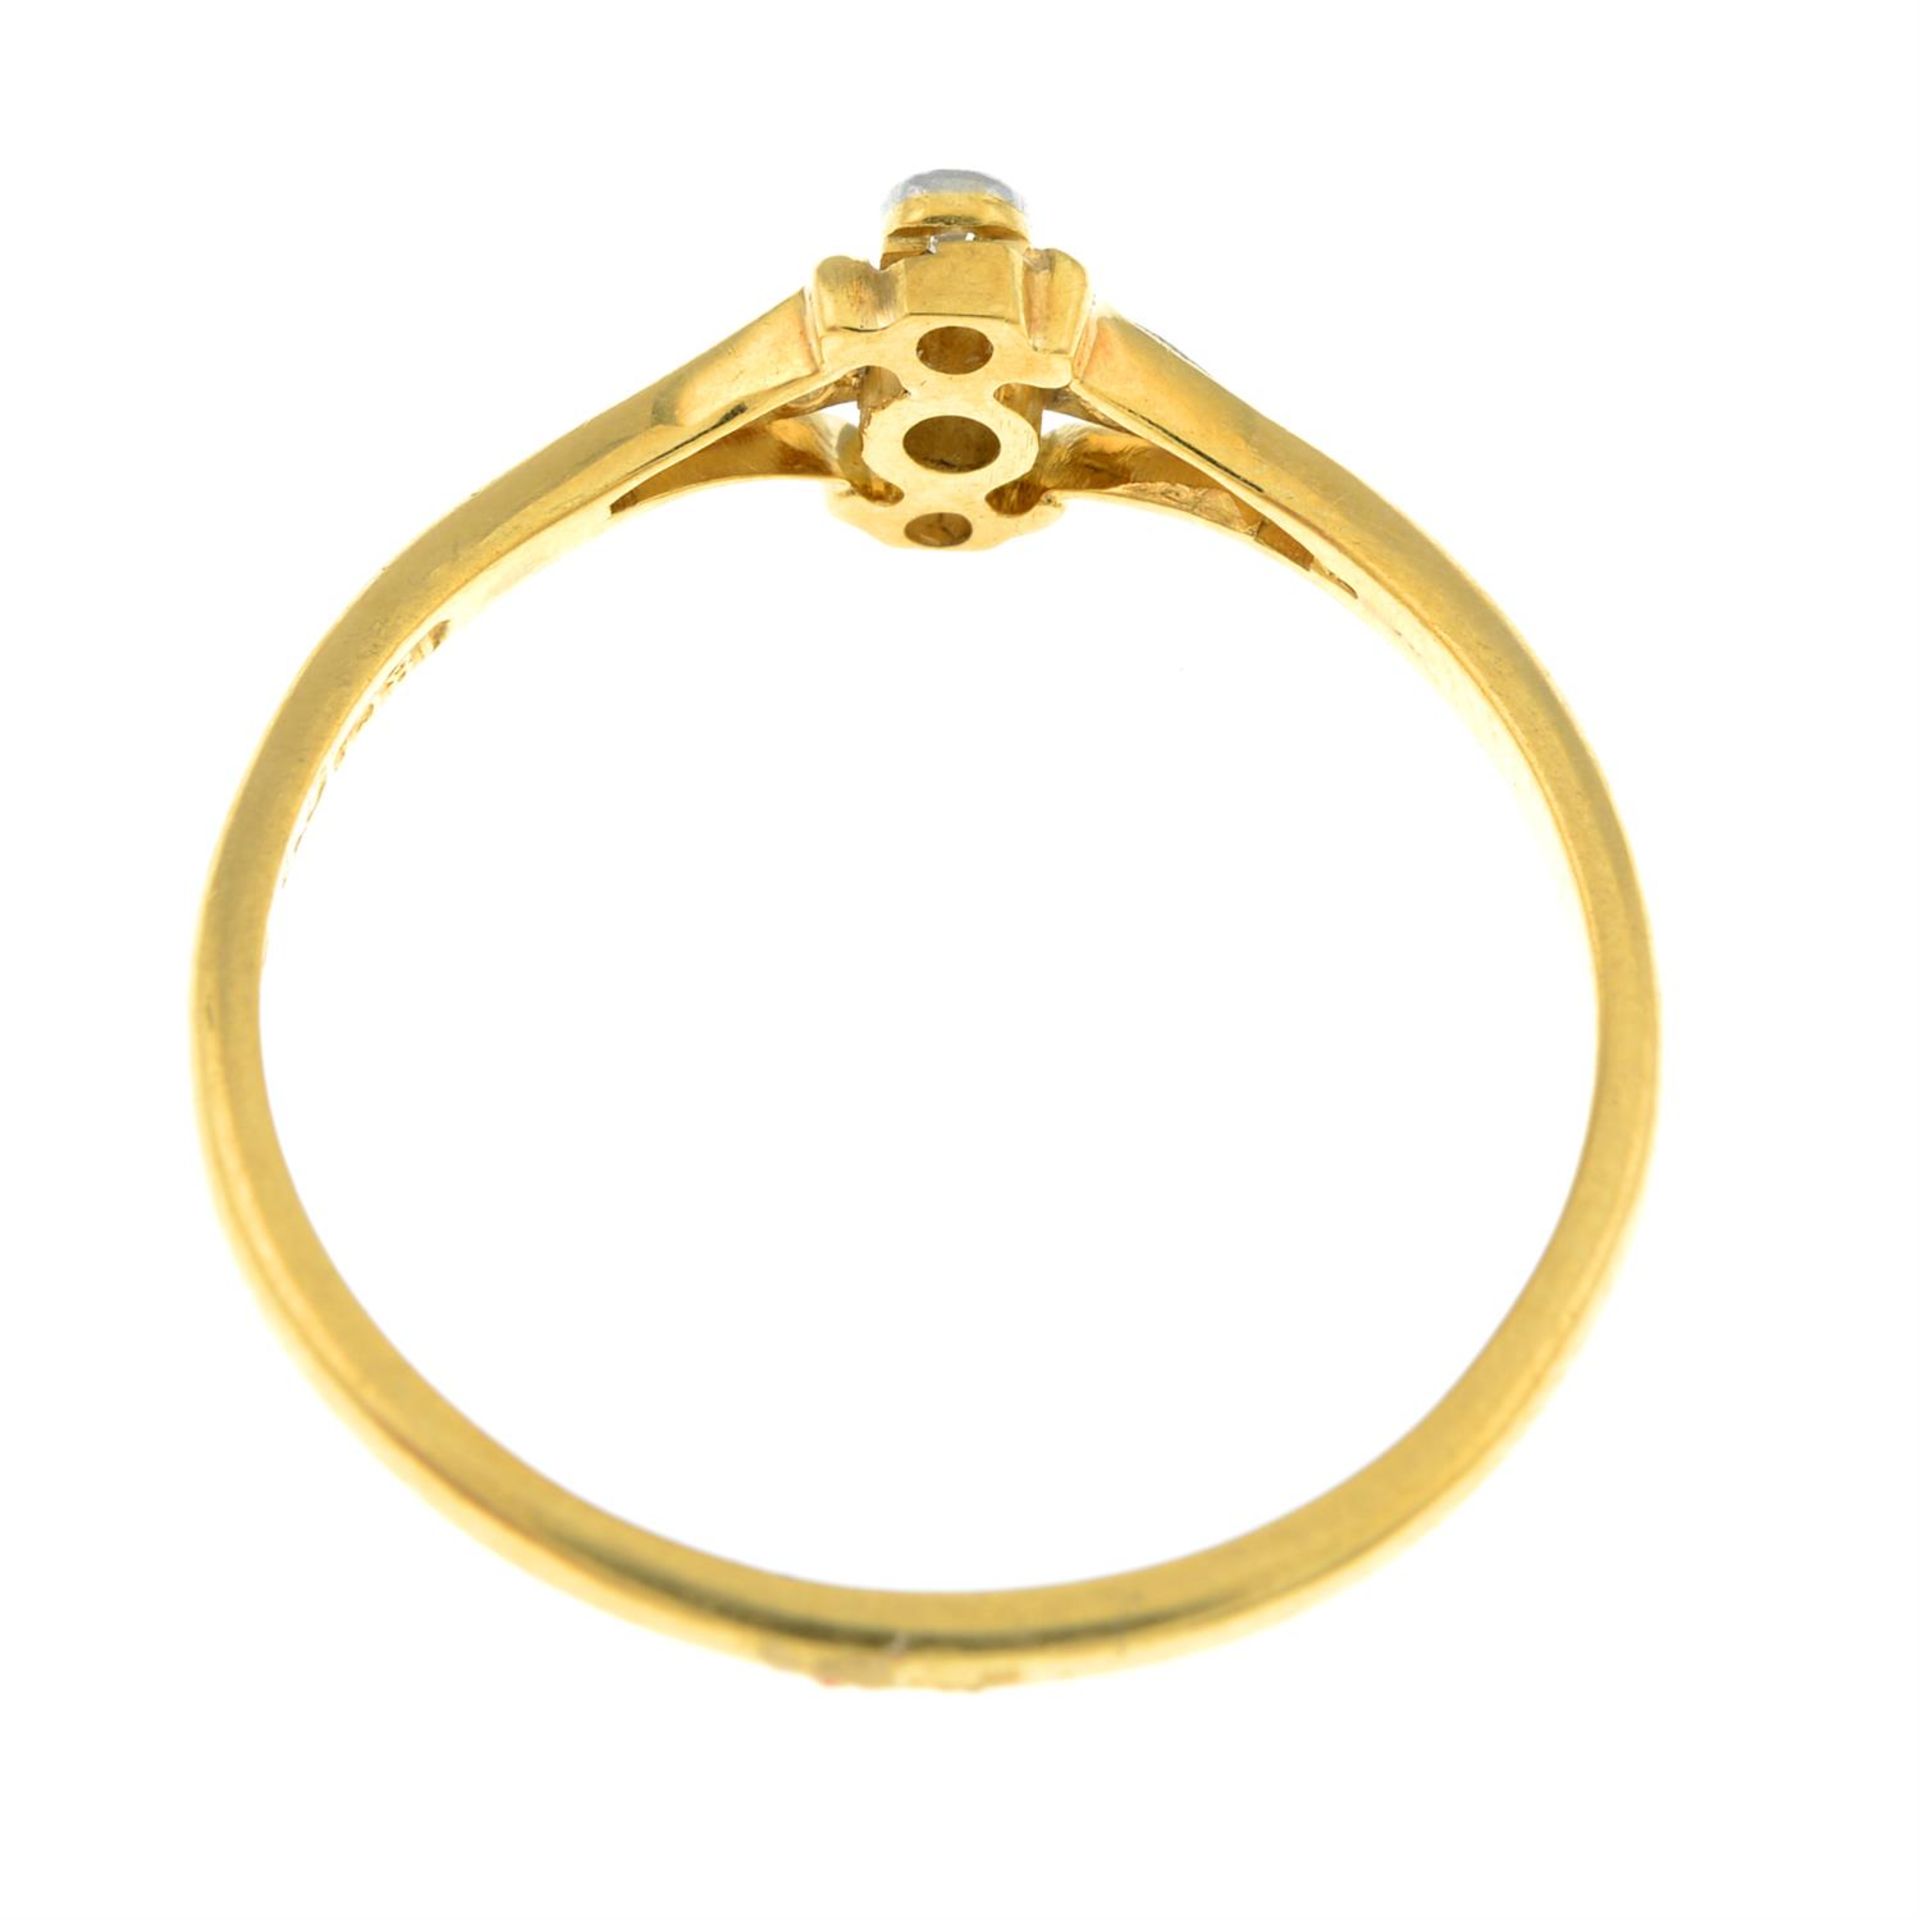 An early 20th century 18ct gold diamond dress ring. - Image 2 of 2